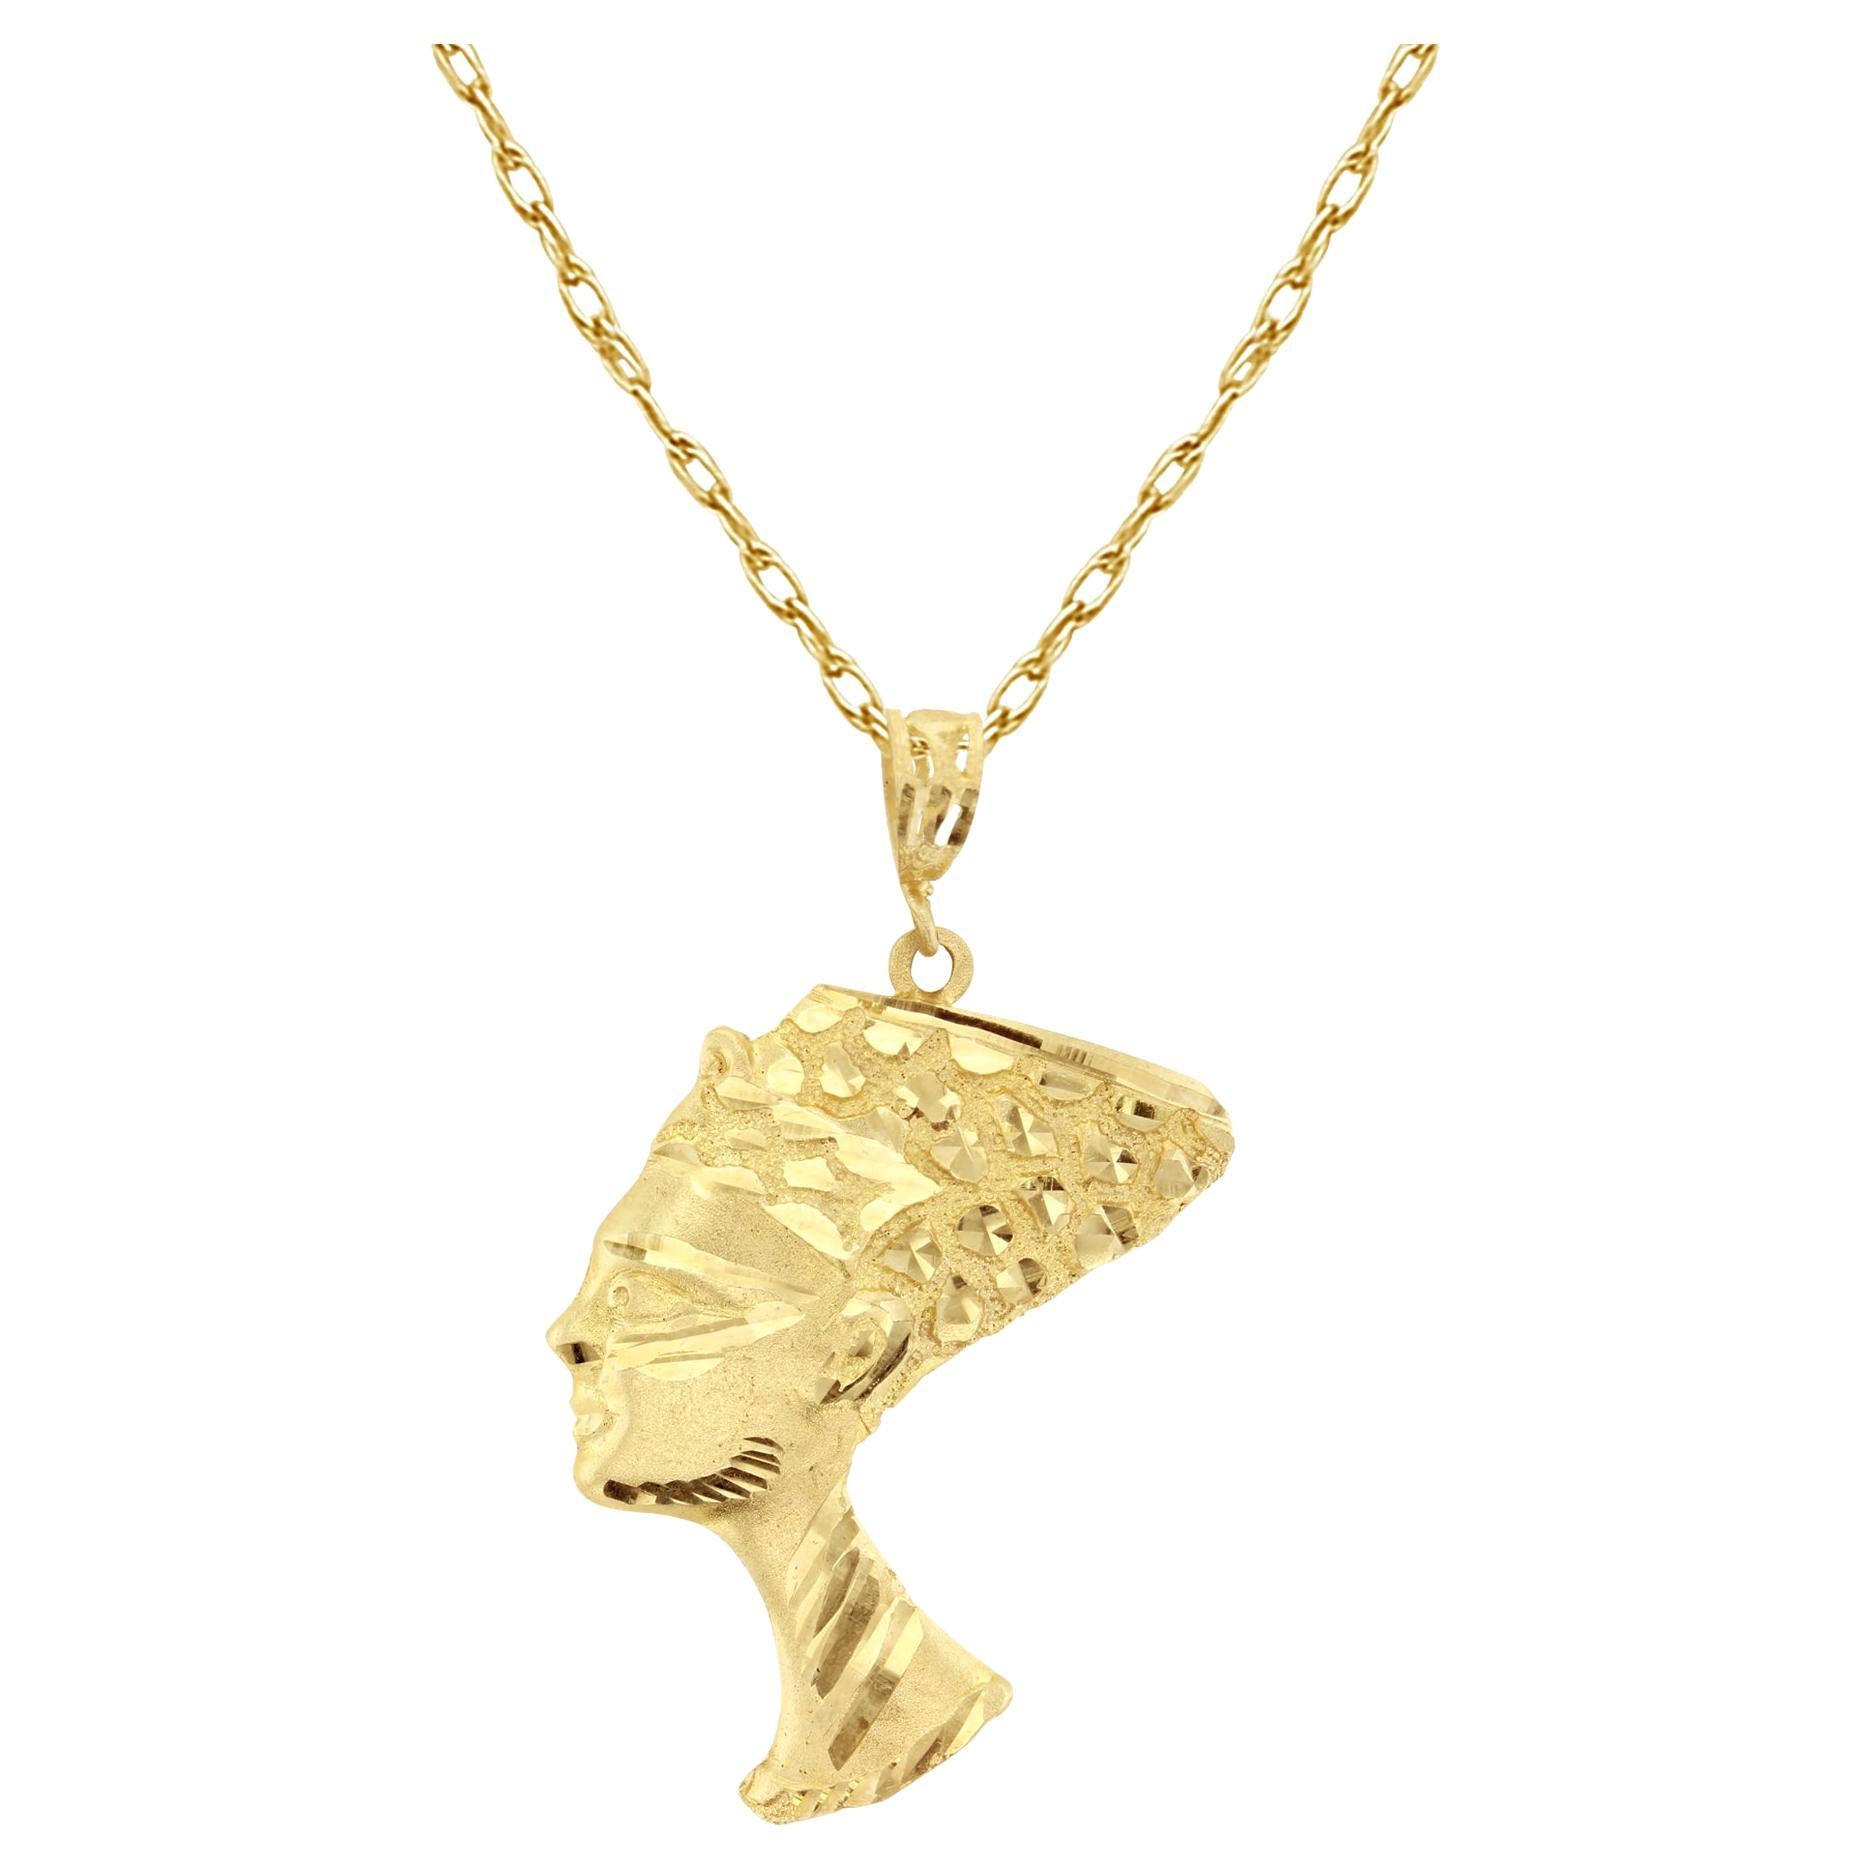 Nefertiti Egyptian Queen Necklace 10K Yellow Gold For Sale